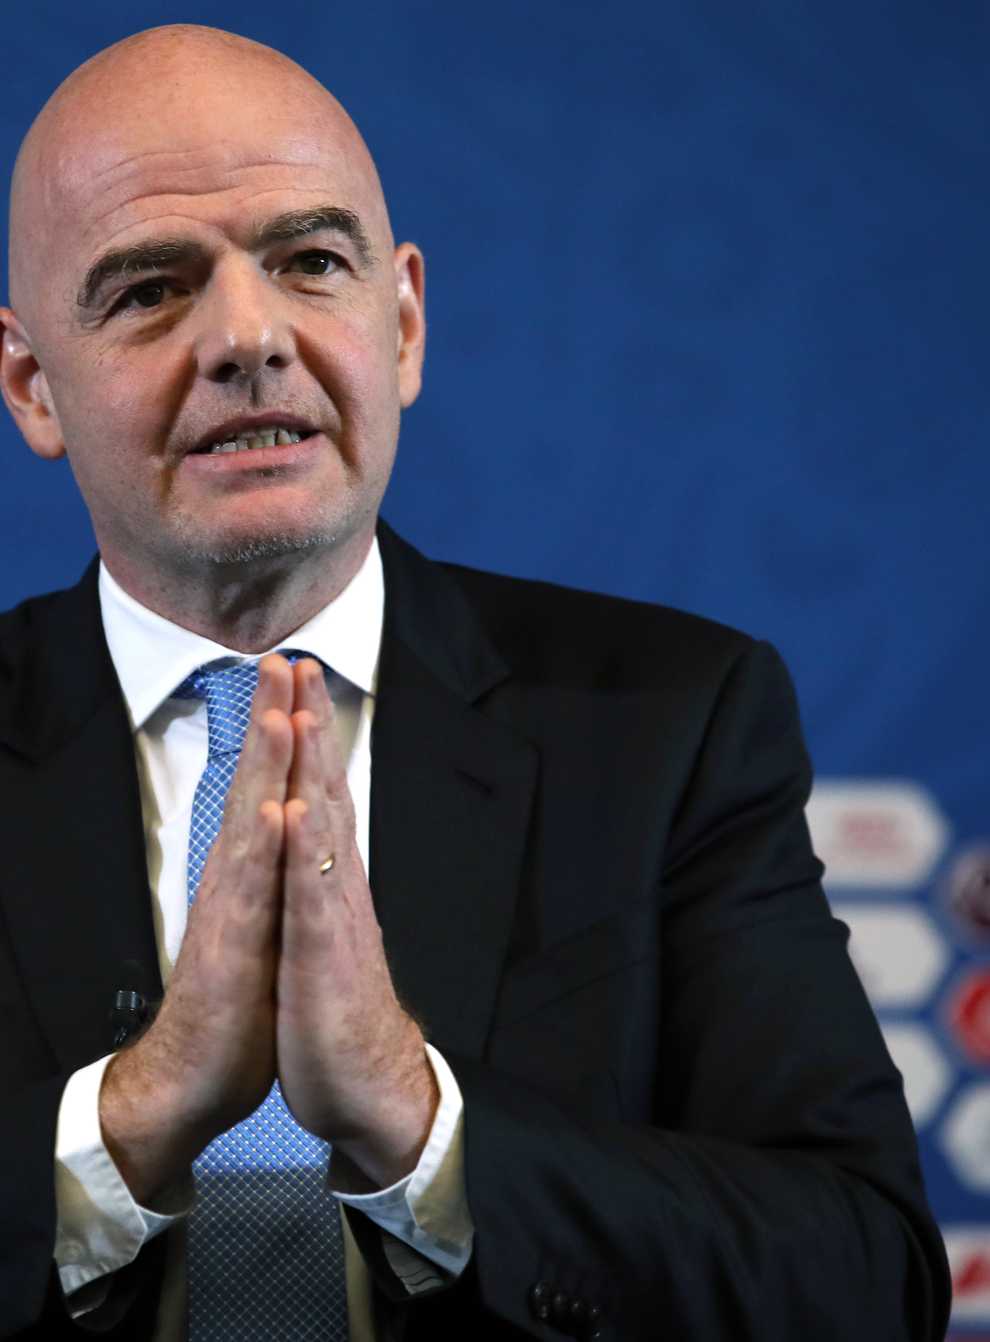 FIFA president Gianni Infantino is the subject of a criminal investigation in Switzerland